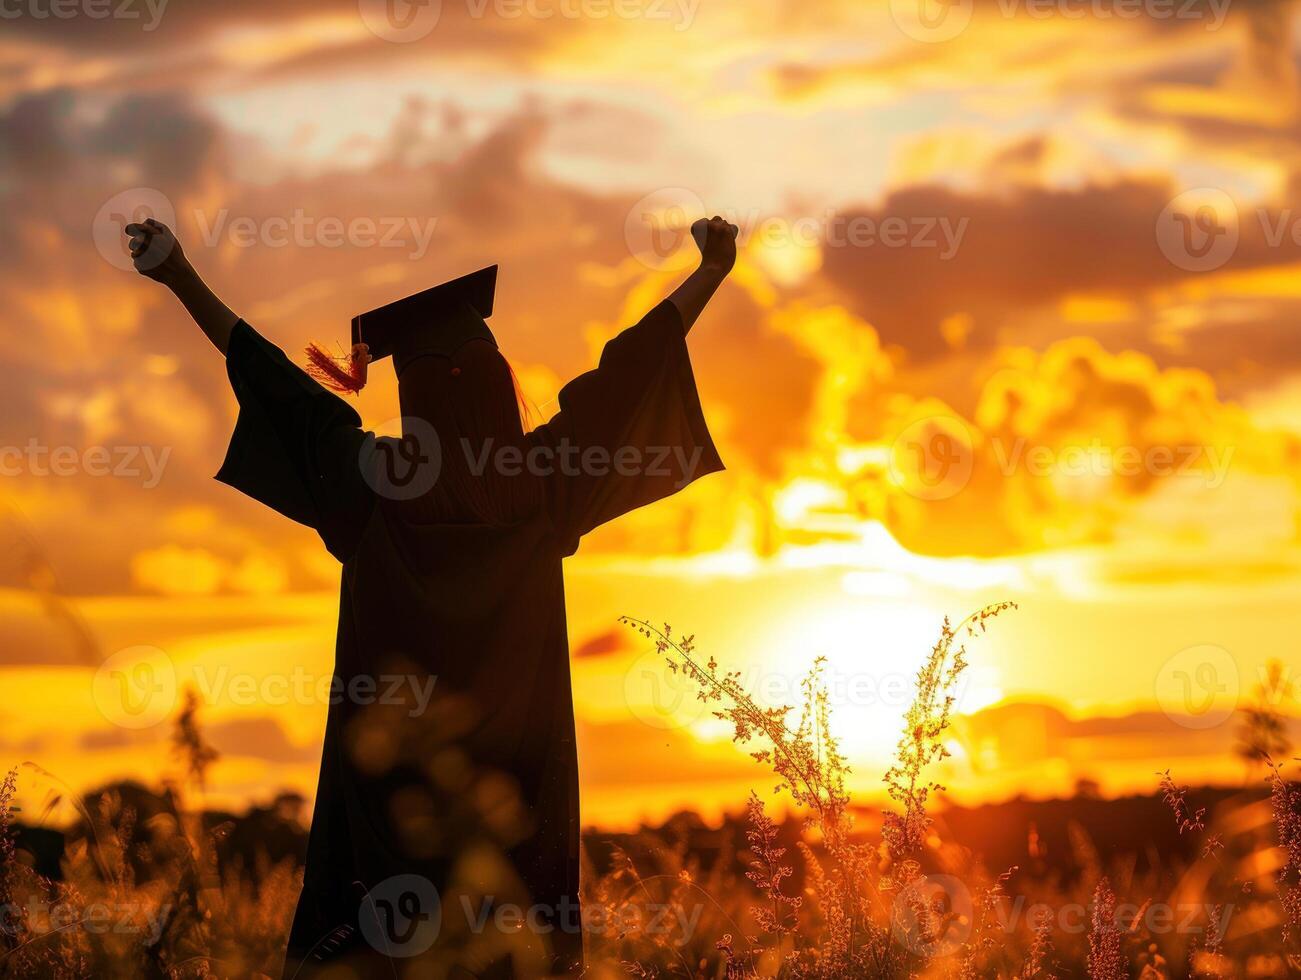 A woman in a graduation cap and gown is standing in front of a sunset photo